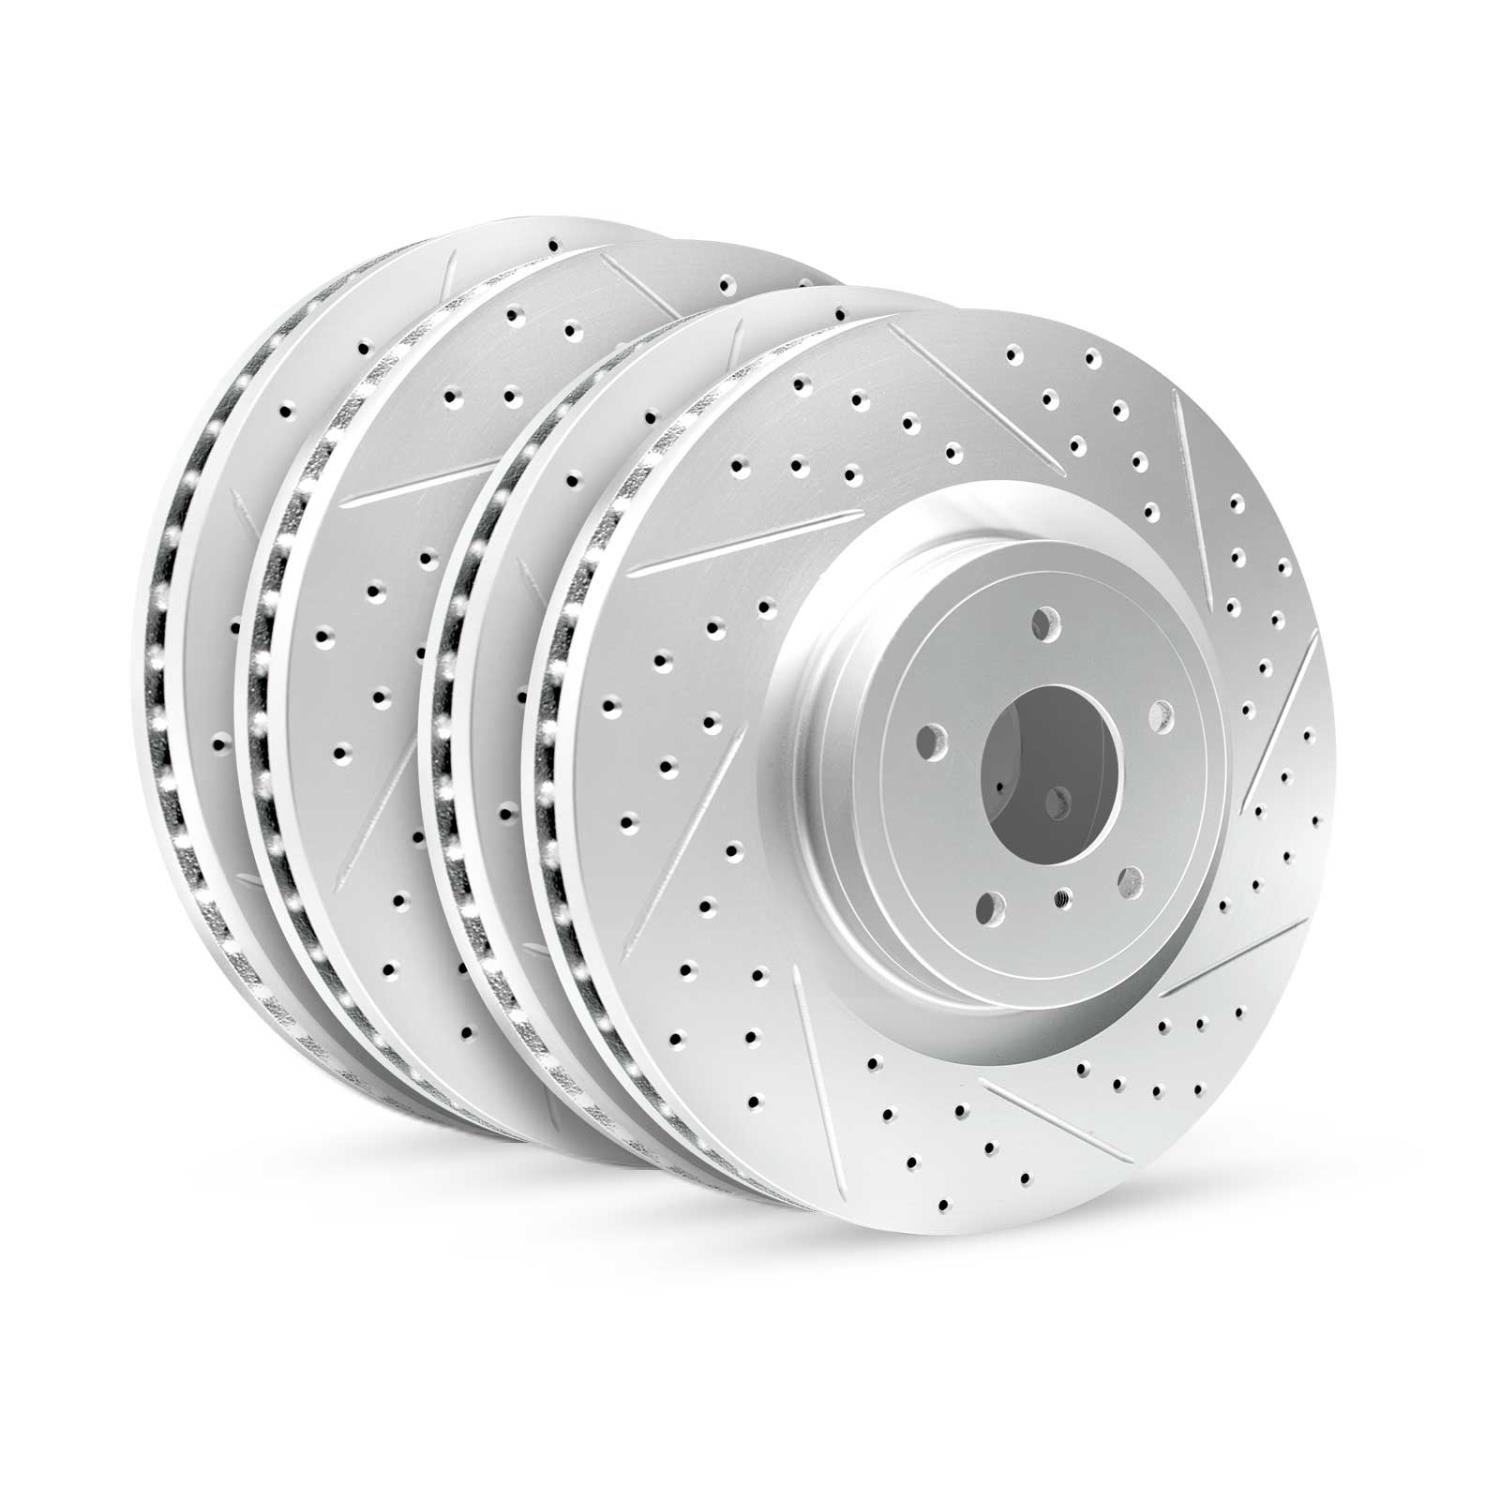 GEO-Carbon Drilled/Slotted Rotors, 1998-2007 Lexus/Toyota/Scion, Position: Front/Rear